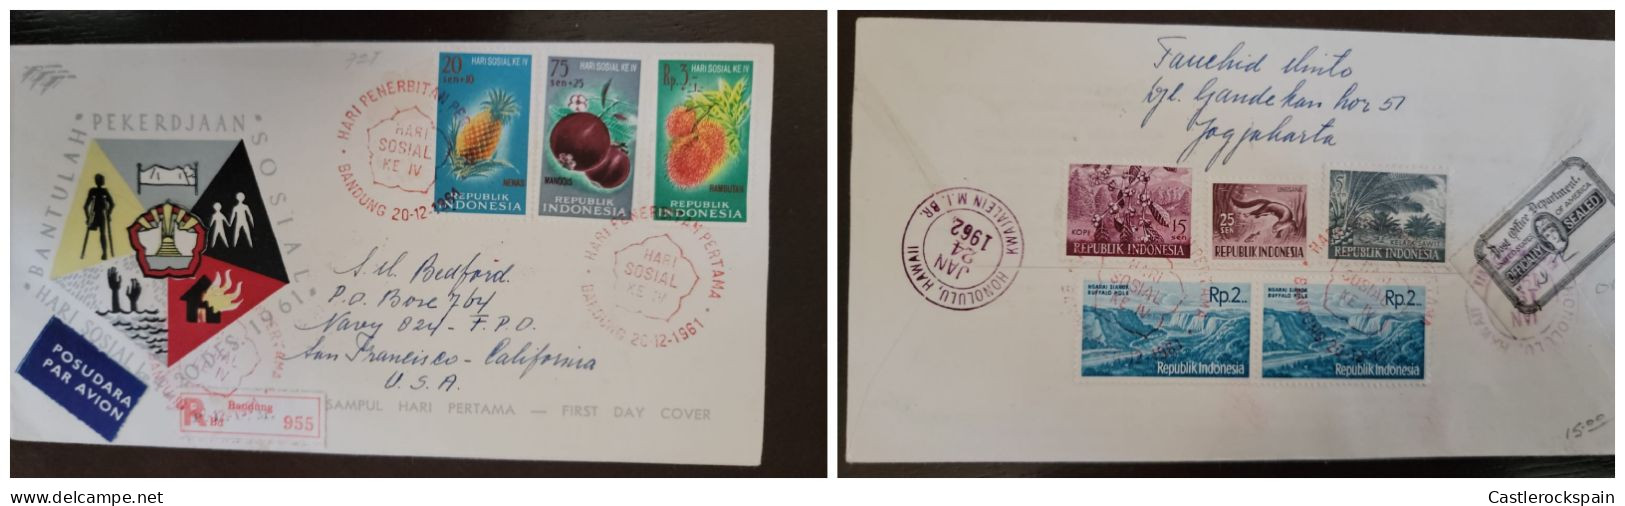 O) 1962 INDONESIA, OFFICIALLY SEALED,  POST OFFICE DEPARTMENT, EXOTIC FRUITS, COFFEE,OIL PALMS,  BUFFALO HOLE - FOR TOUR - Indonésie